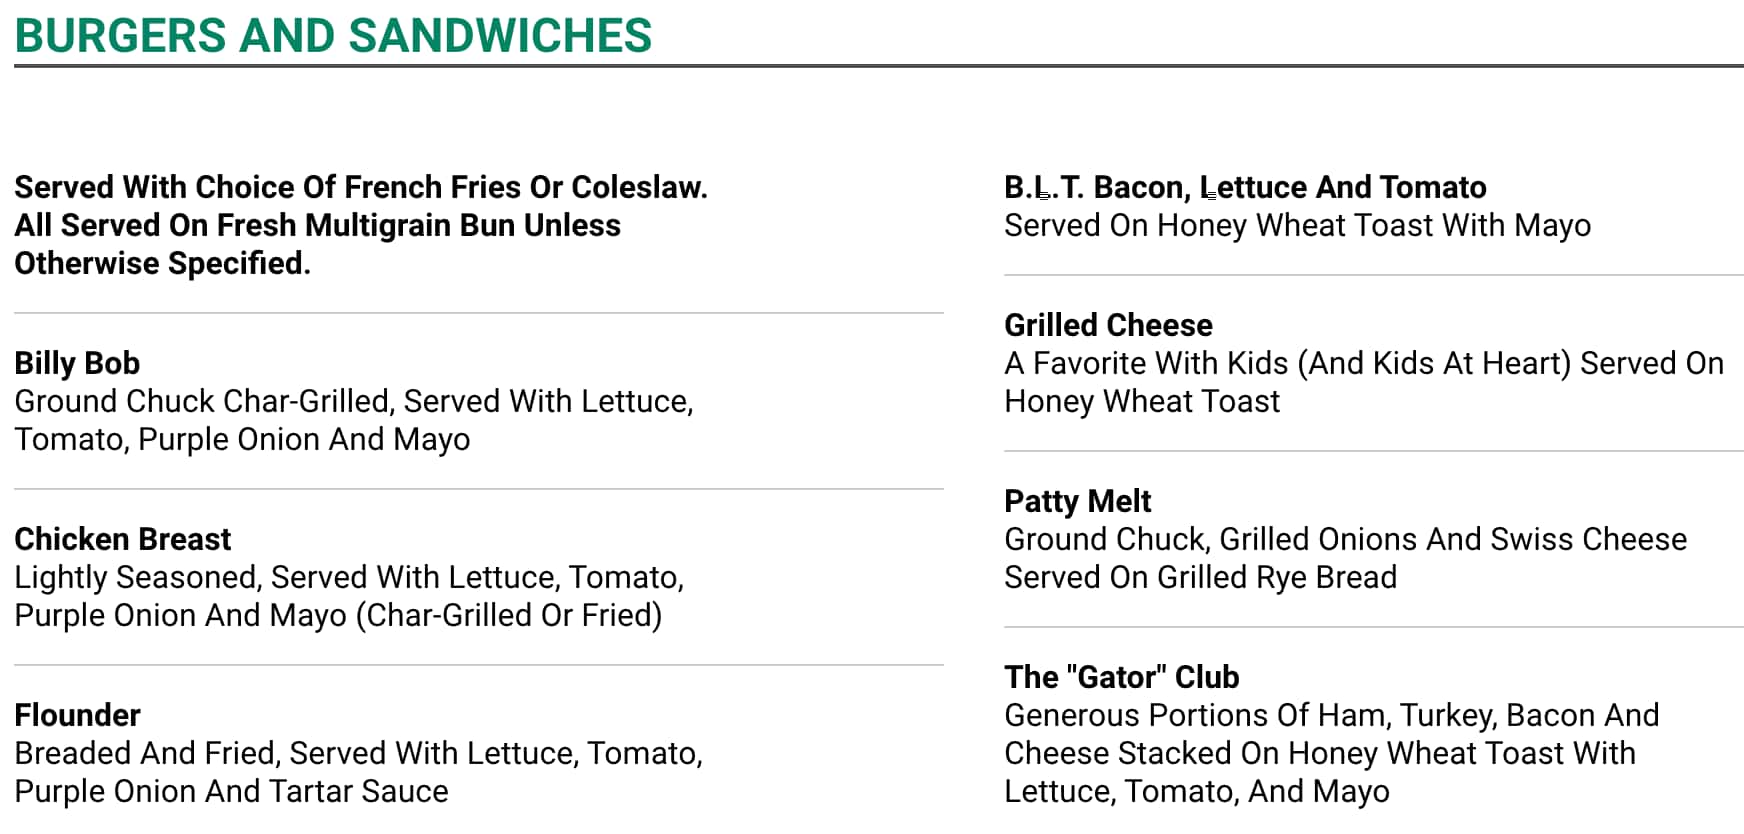 The Gator Cafe Burgers and Sandwiches Menu